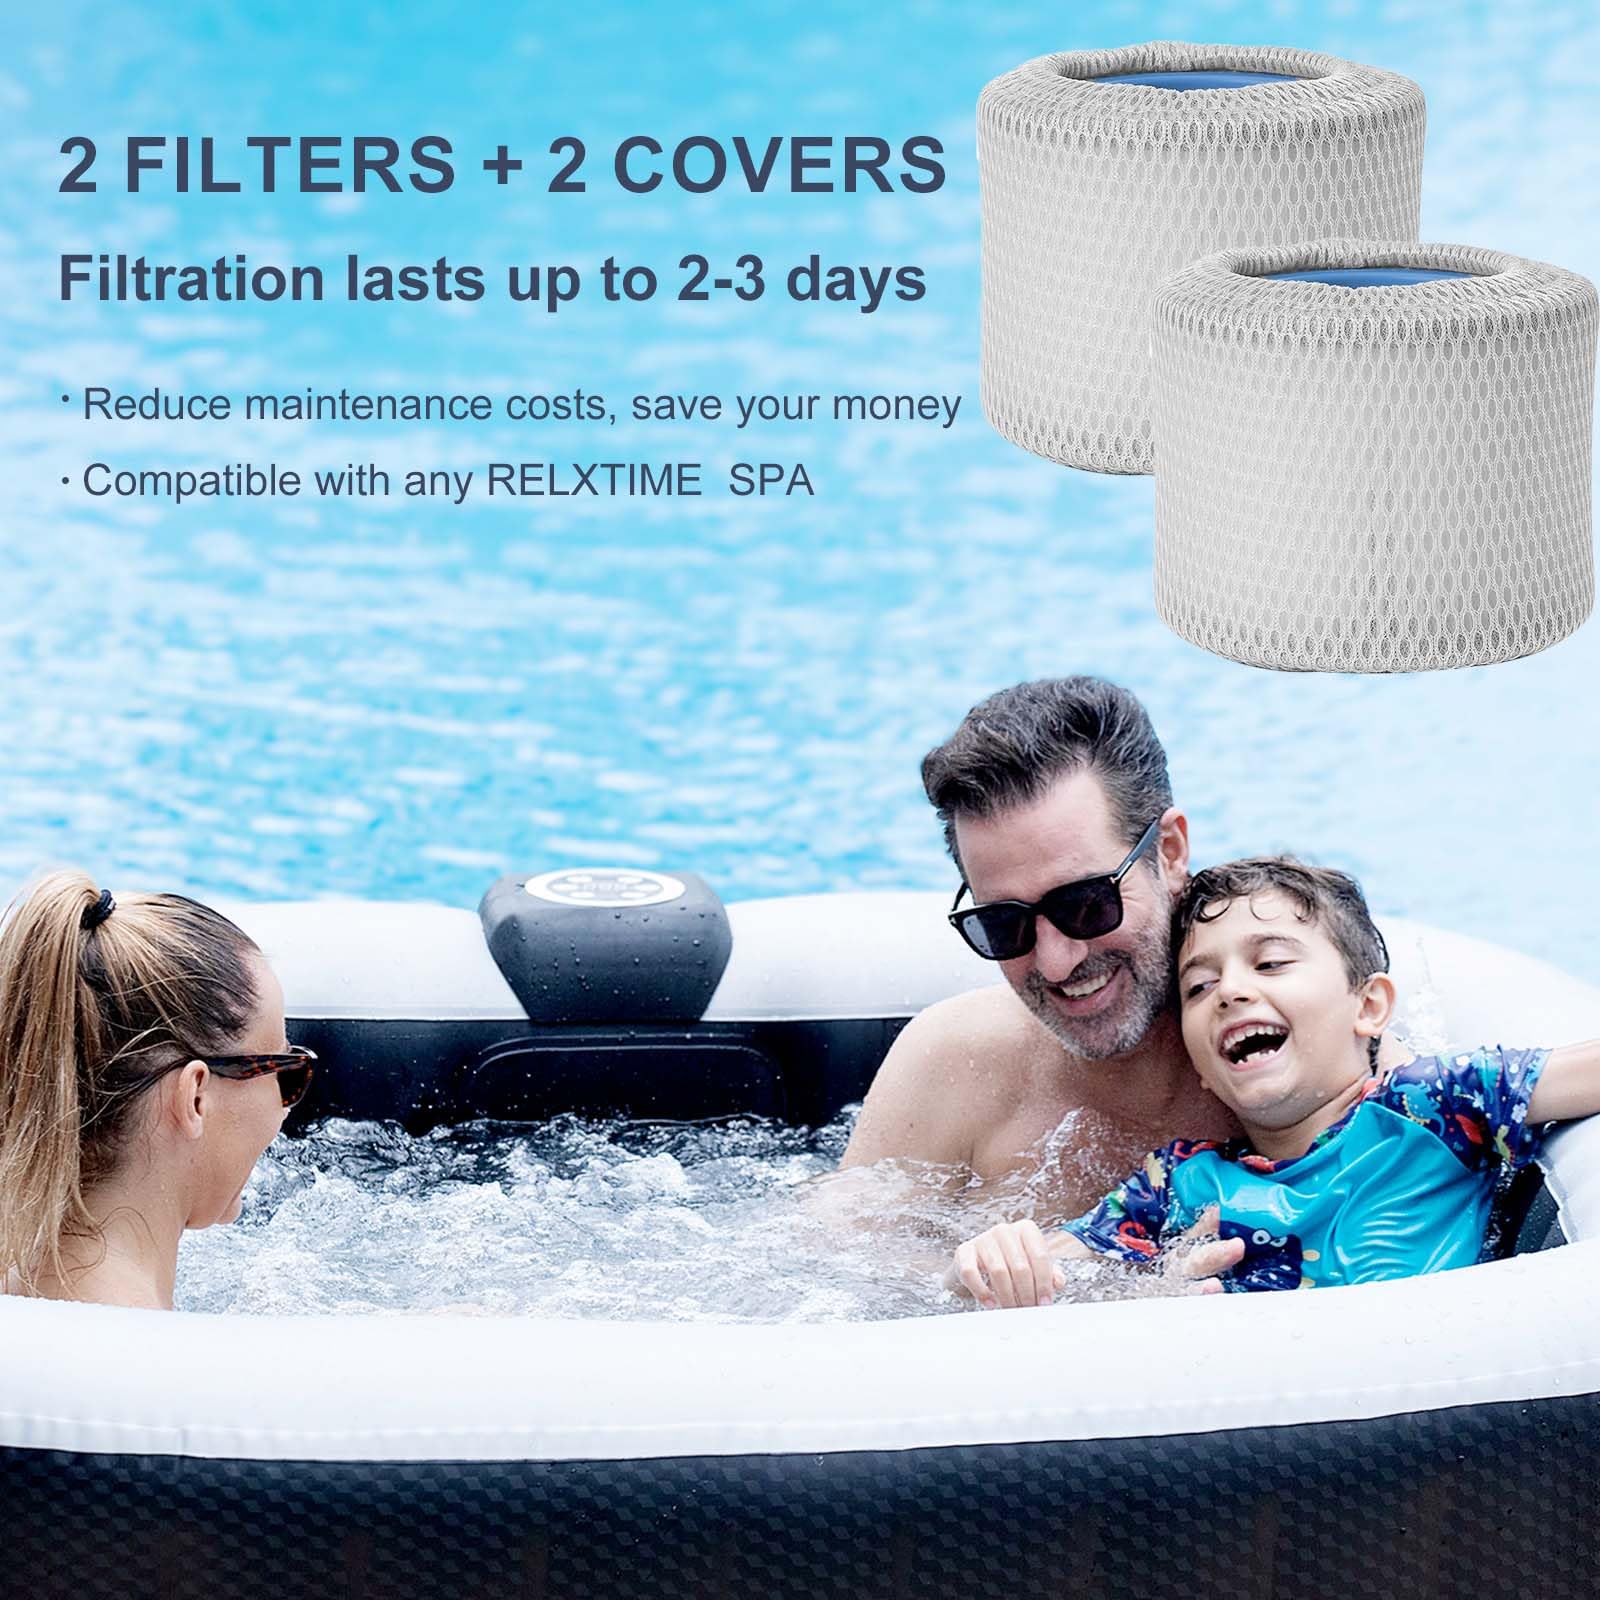 Relxtime 2 Pack Spa Filter Replacement, Pool Filters Hot Tub Filter Cartridges, Compatible With Inflatable Tubs Filtration, Blue